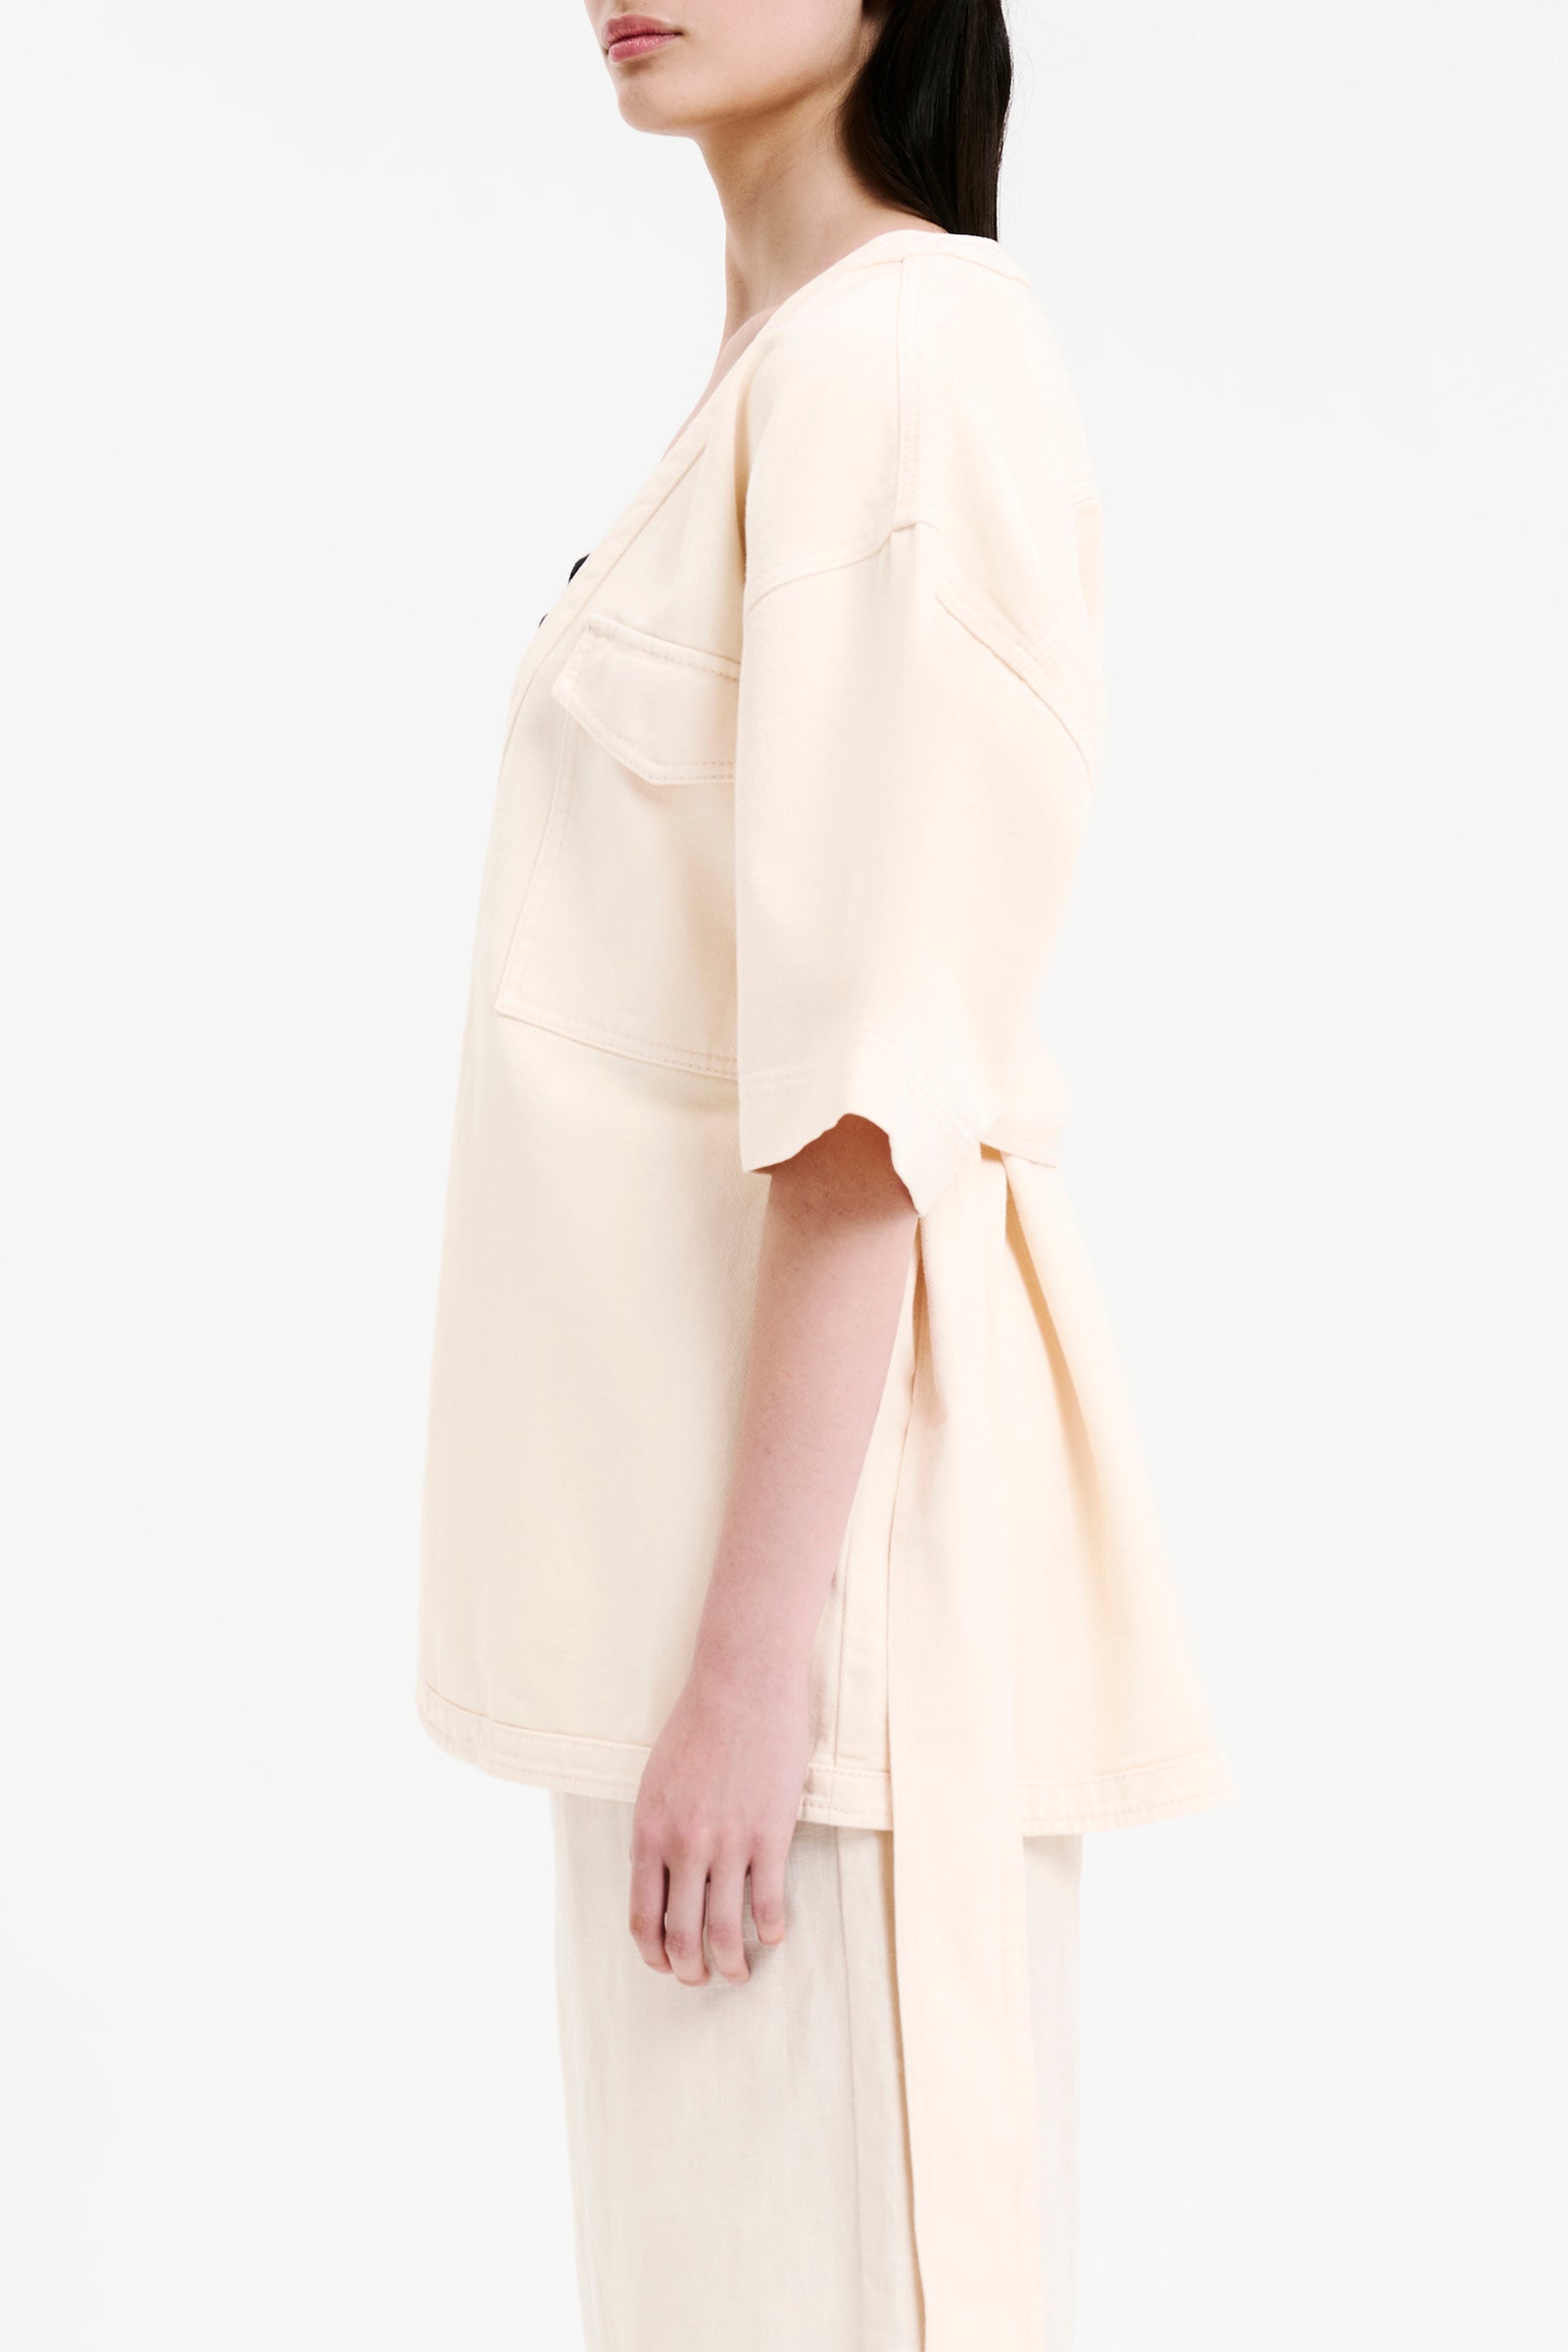 Nude Lucy Blaise Tie Front Jacket in White Cloud